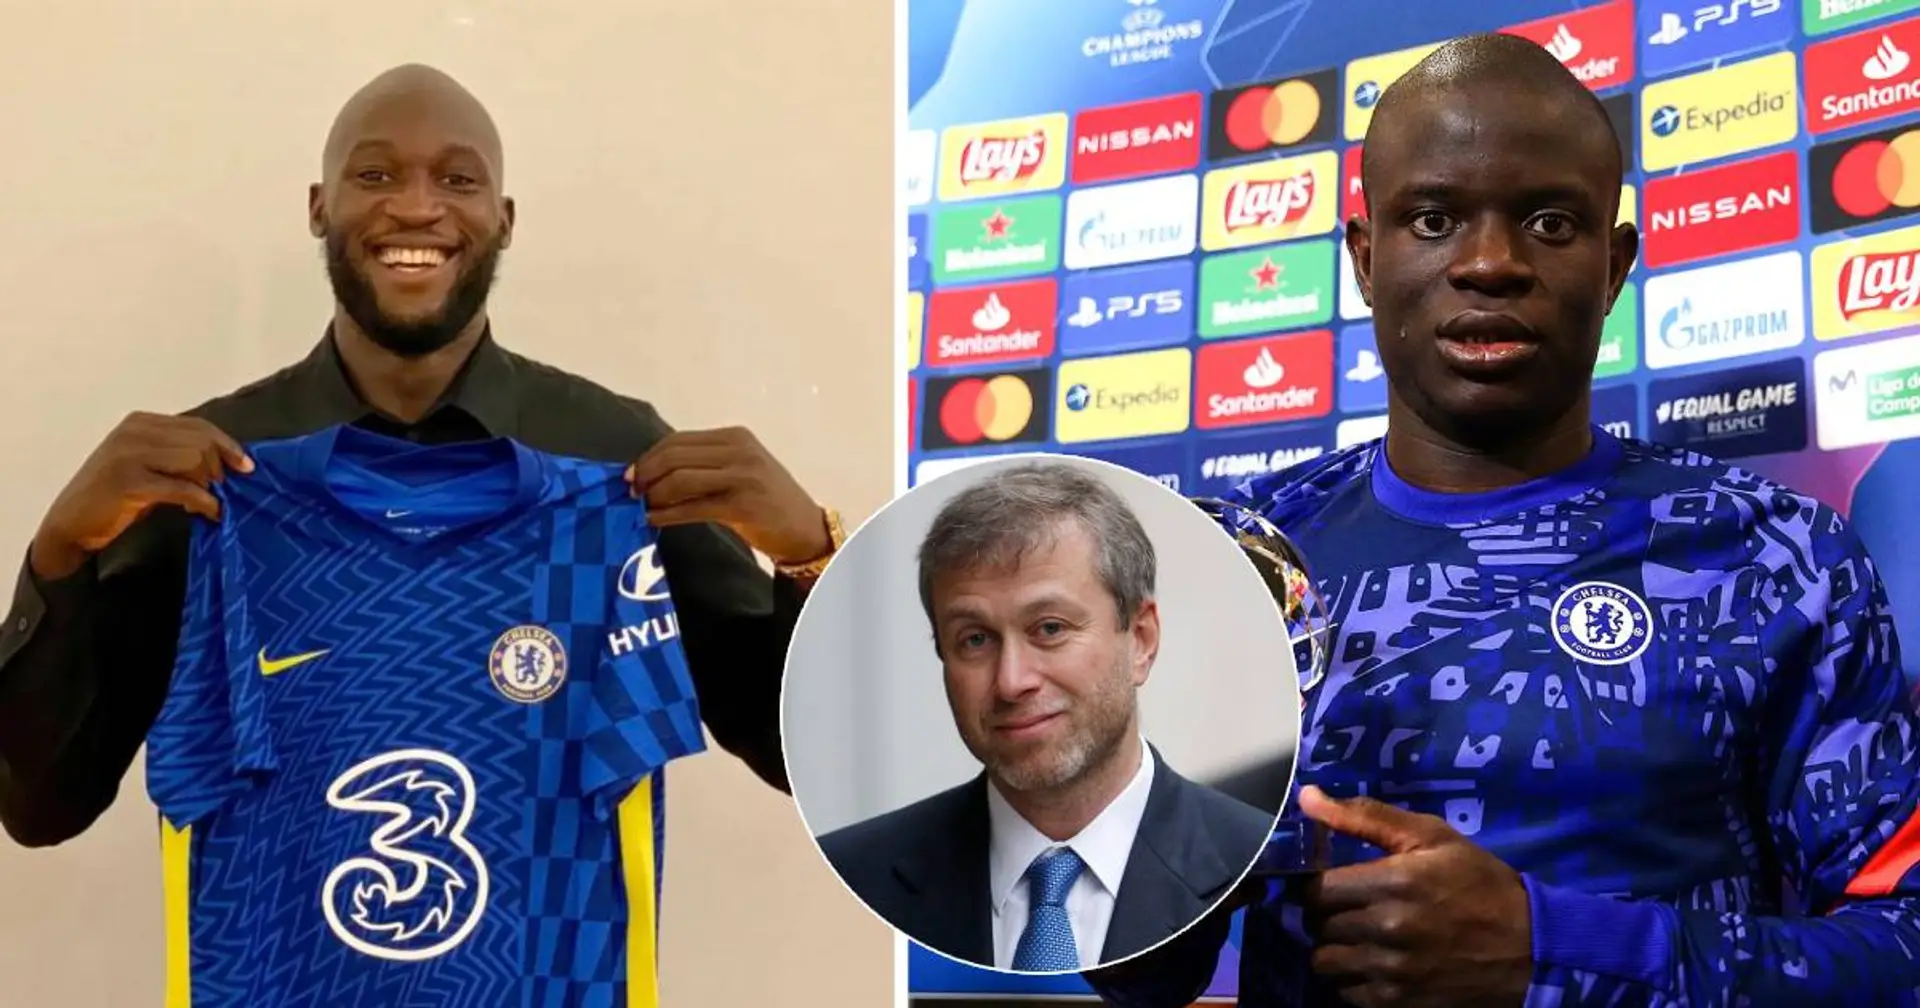 Lukaku becomes Chelsea's highest earner - contract details revealed: The Athletic